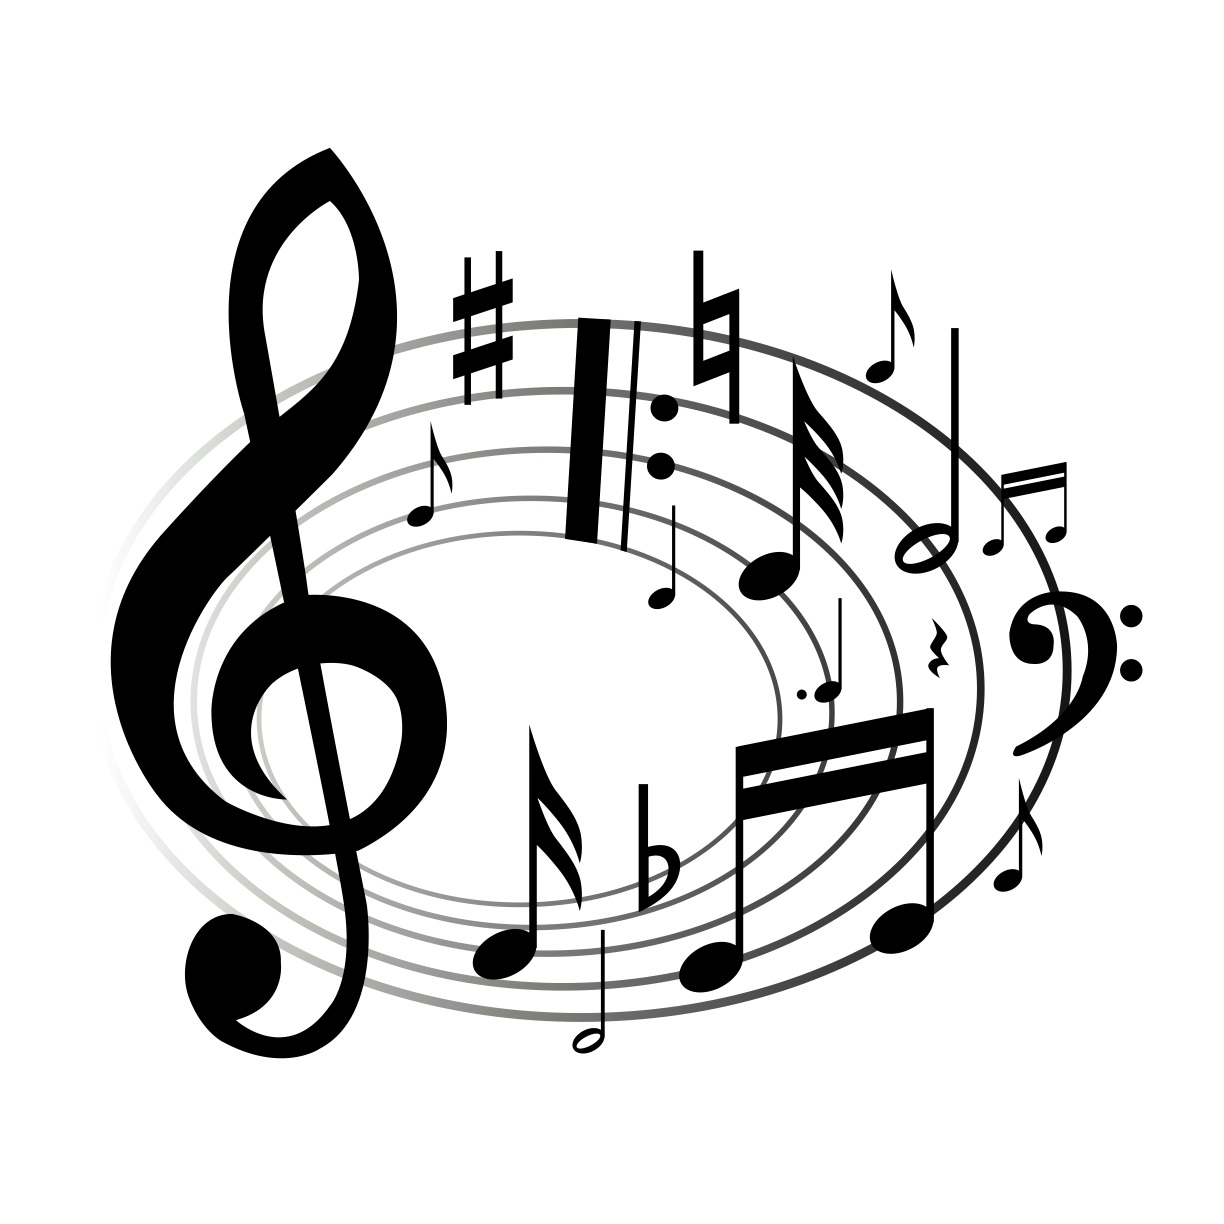 Images Of Musical Symbols - ClipArt Best